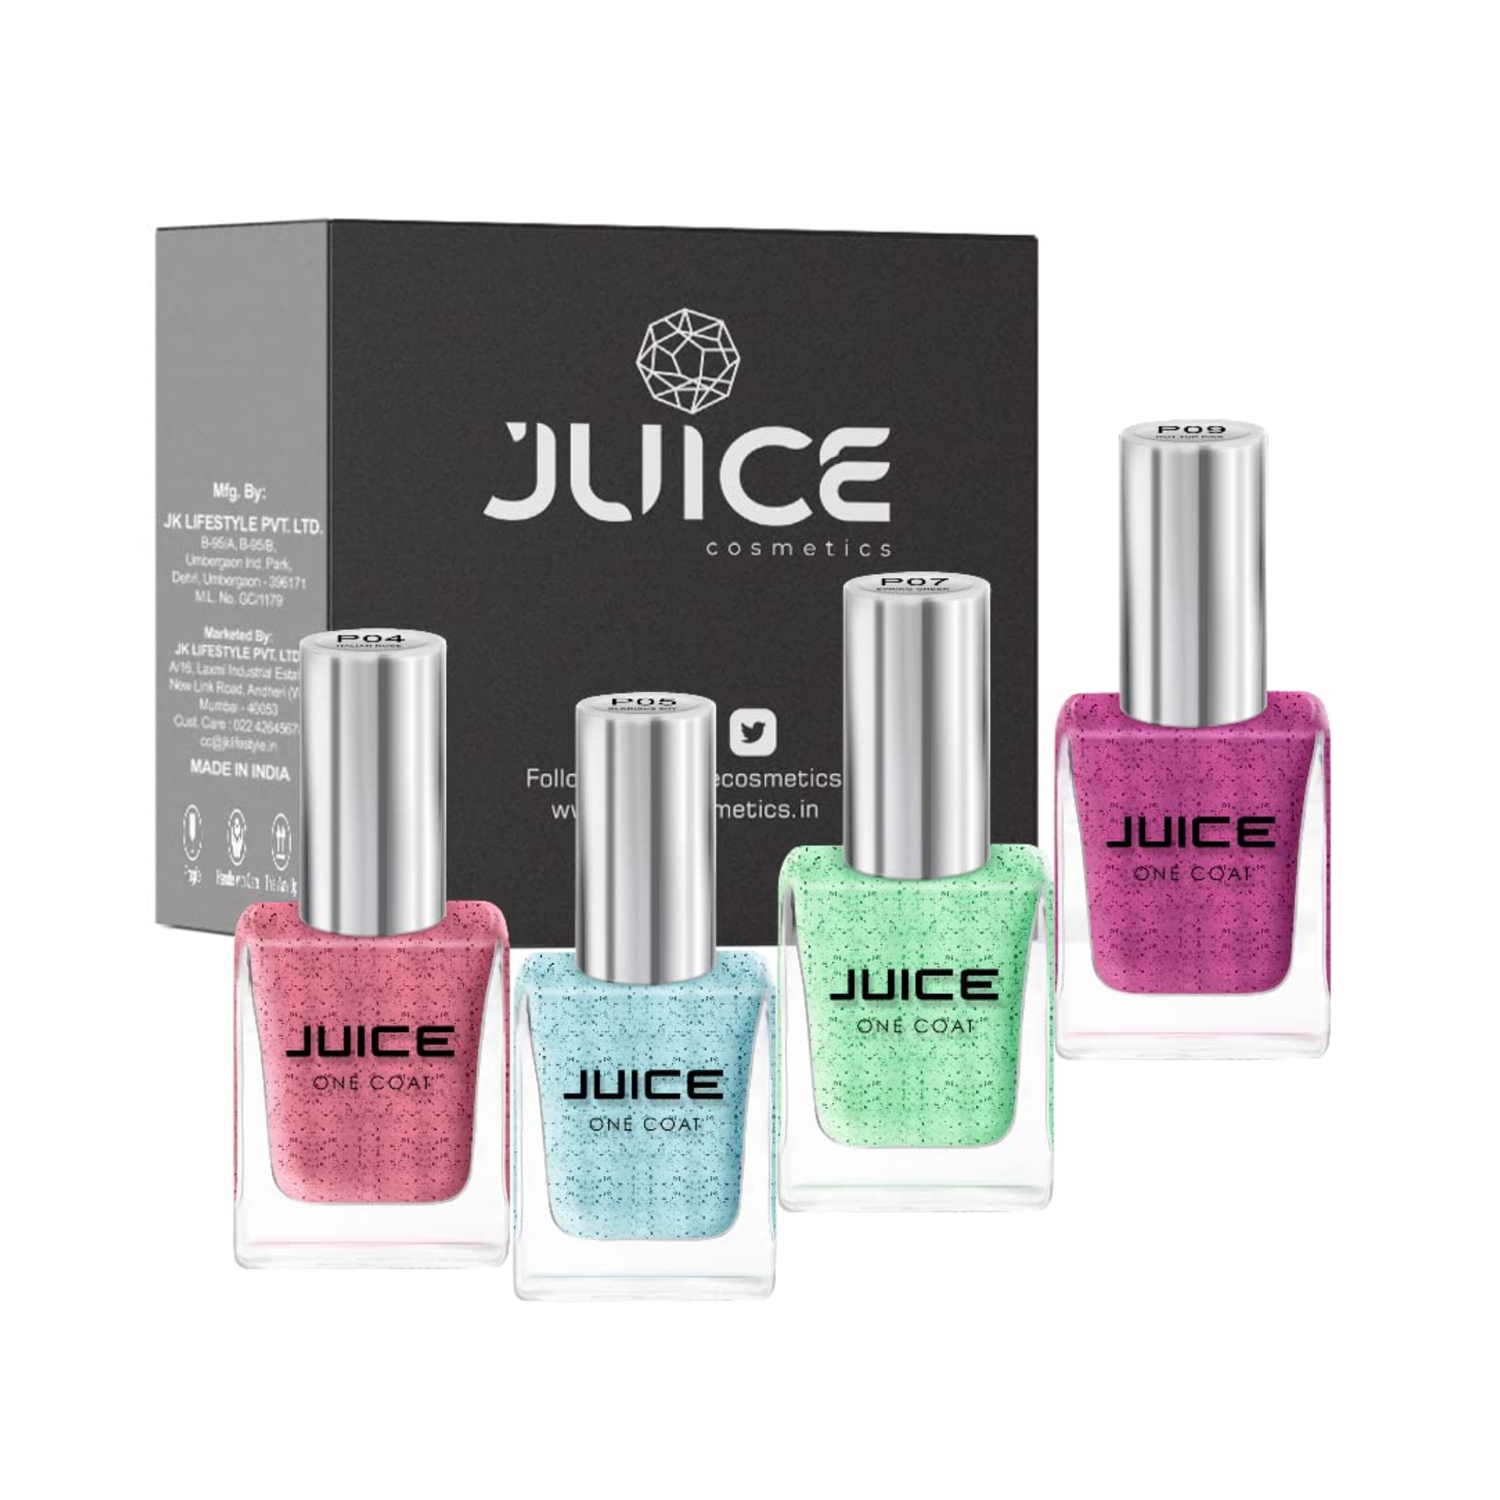 Juice Cosmetics Nail Polishes || Swatches & Review - YouTube